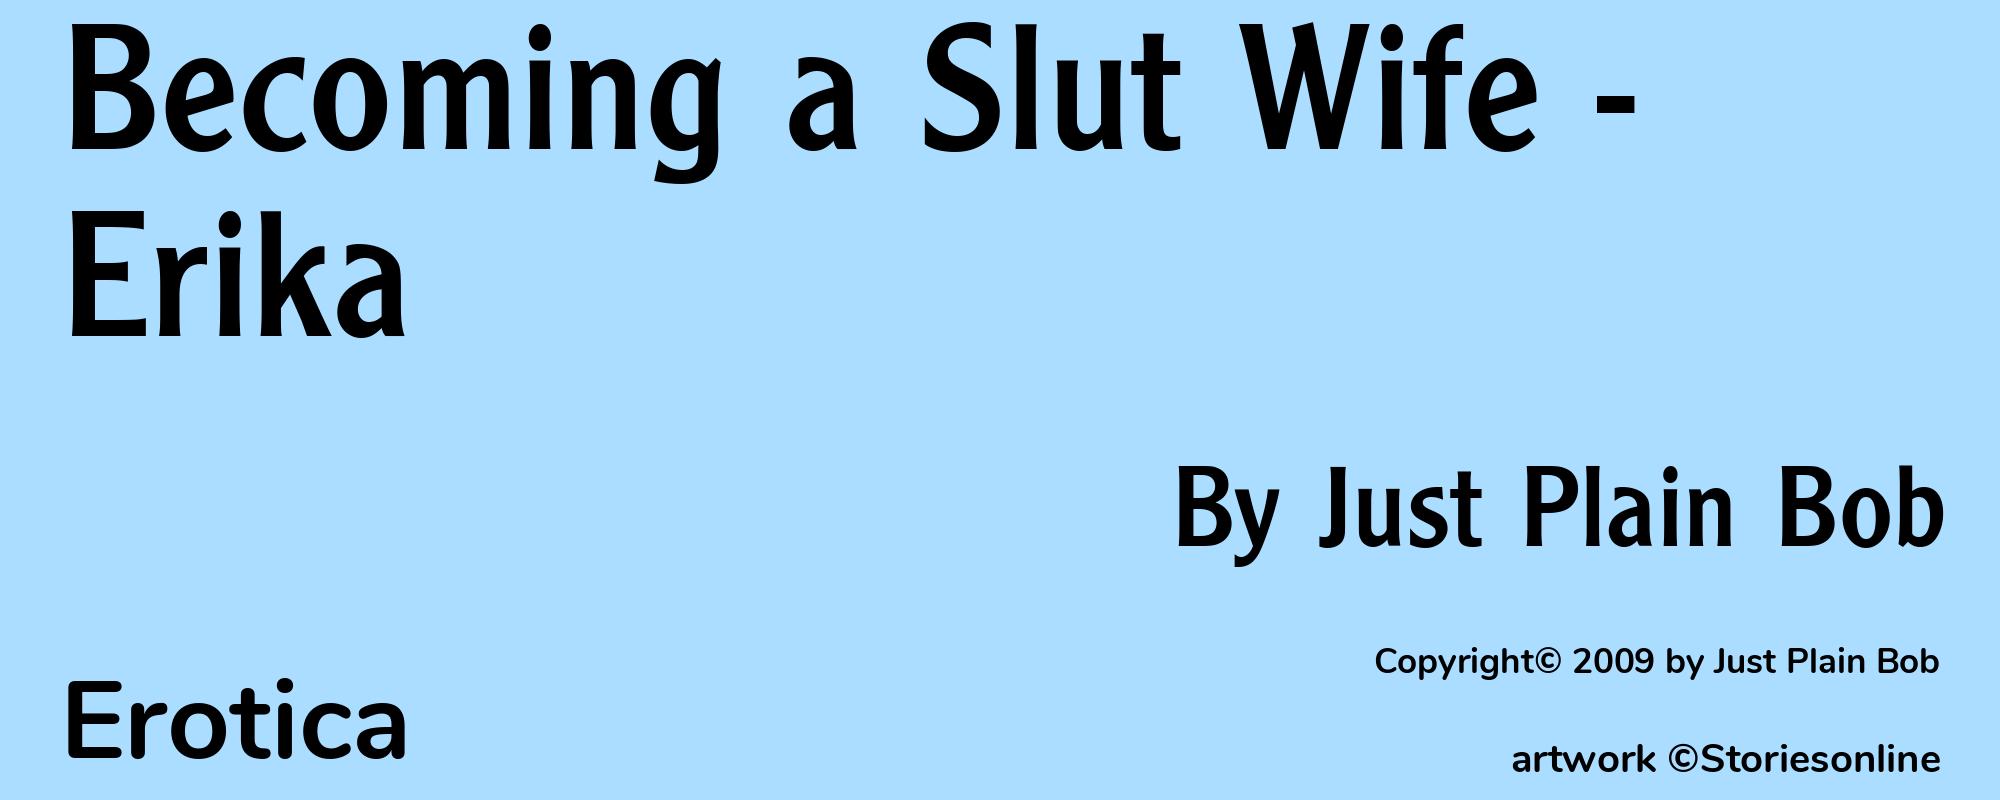 Becoming a Slut Wife - Erika - Cover